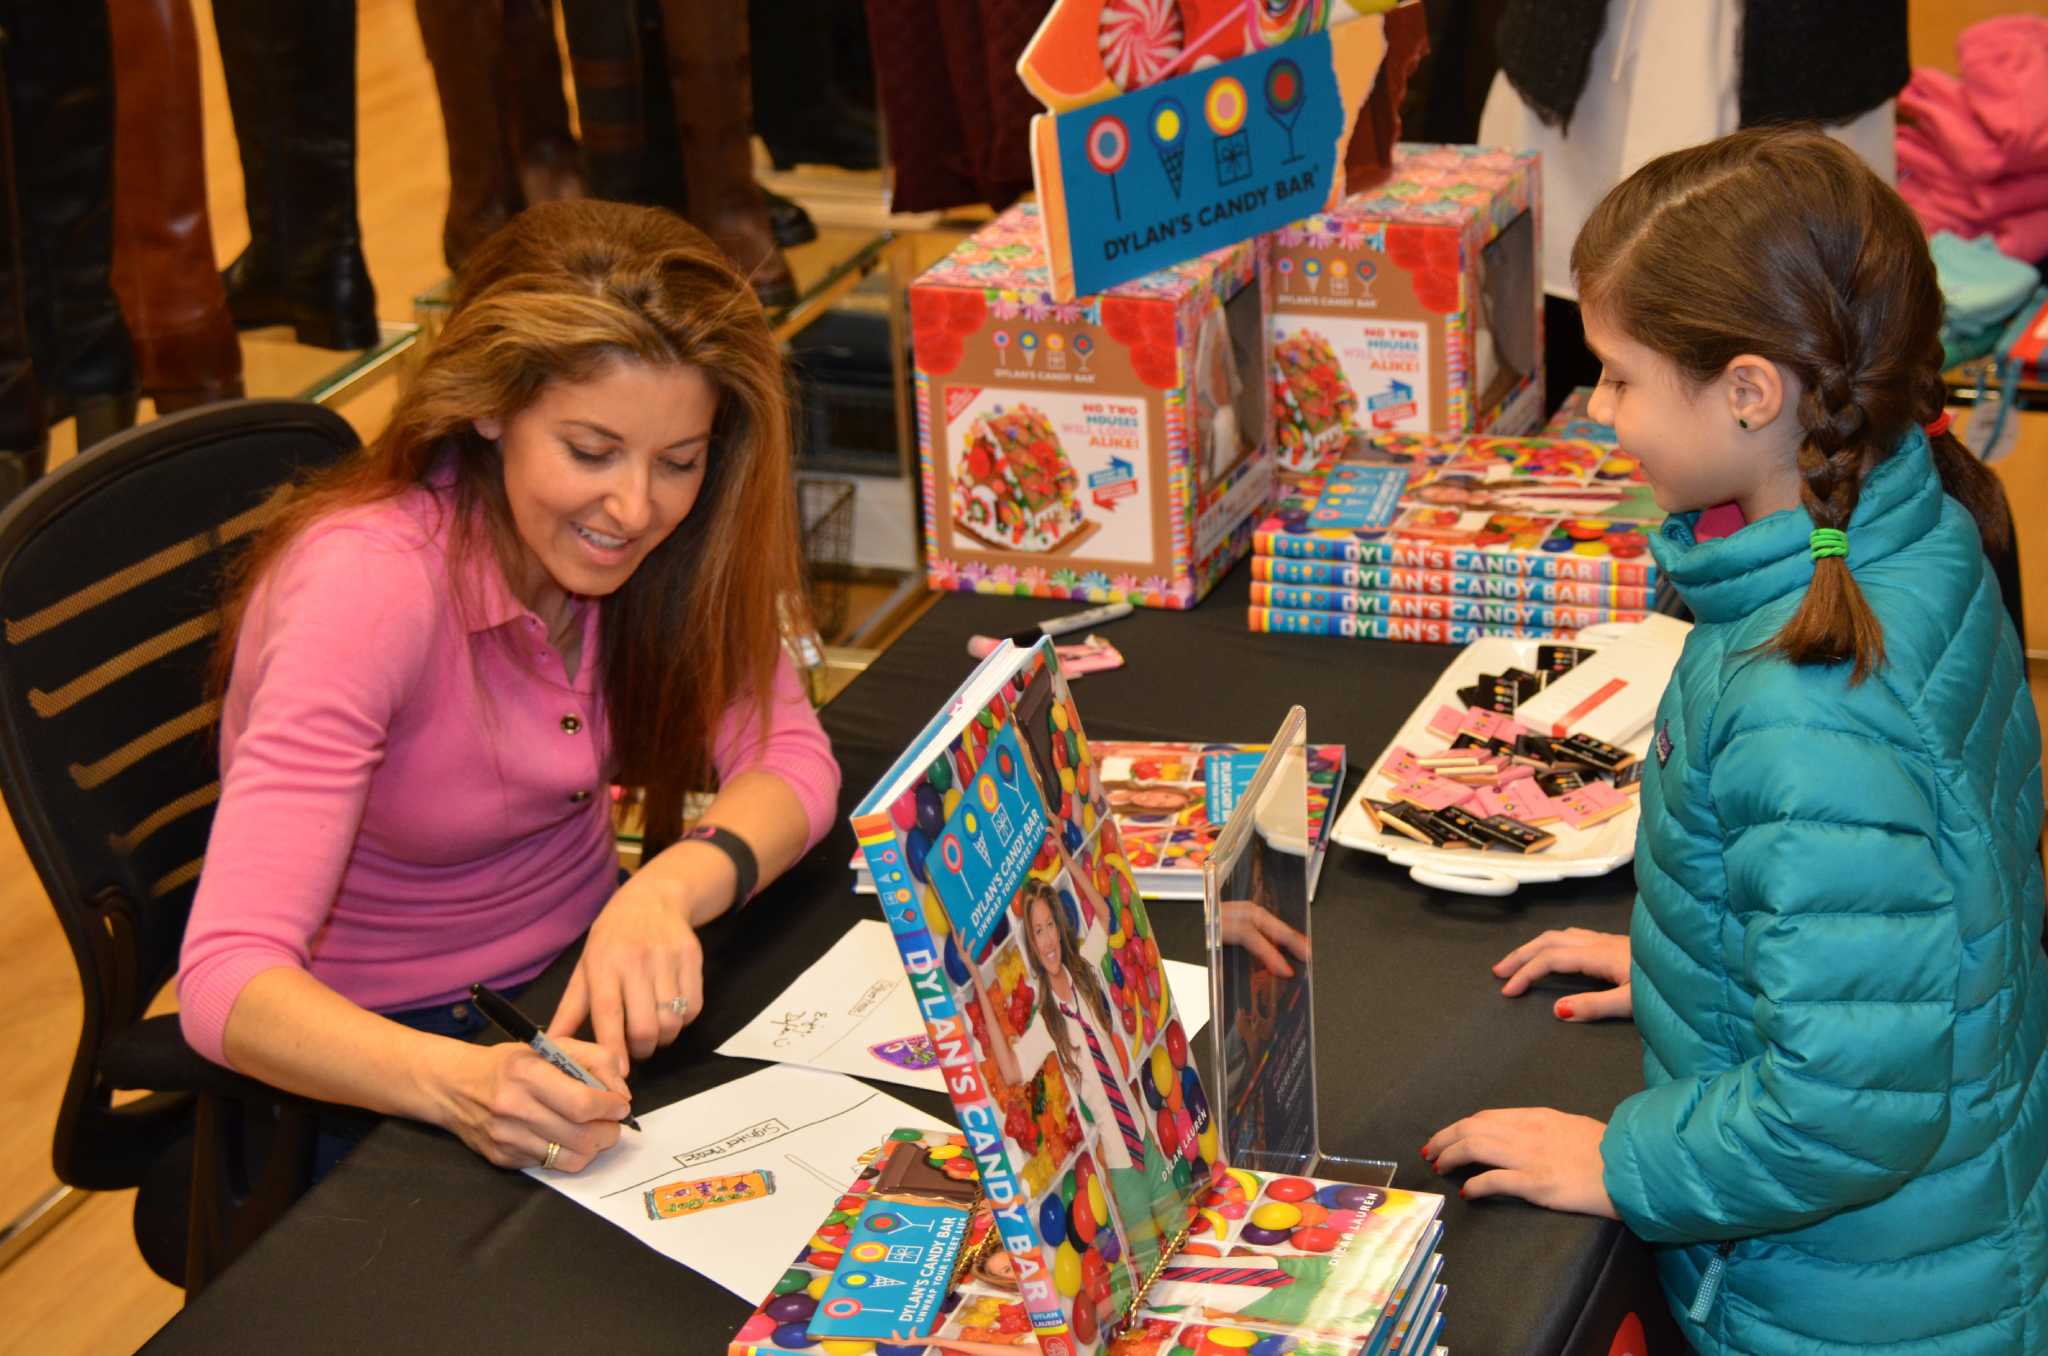 Dylan Lauren At Roosevelt Field Mall To Sign New Book